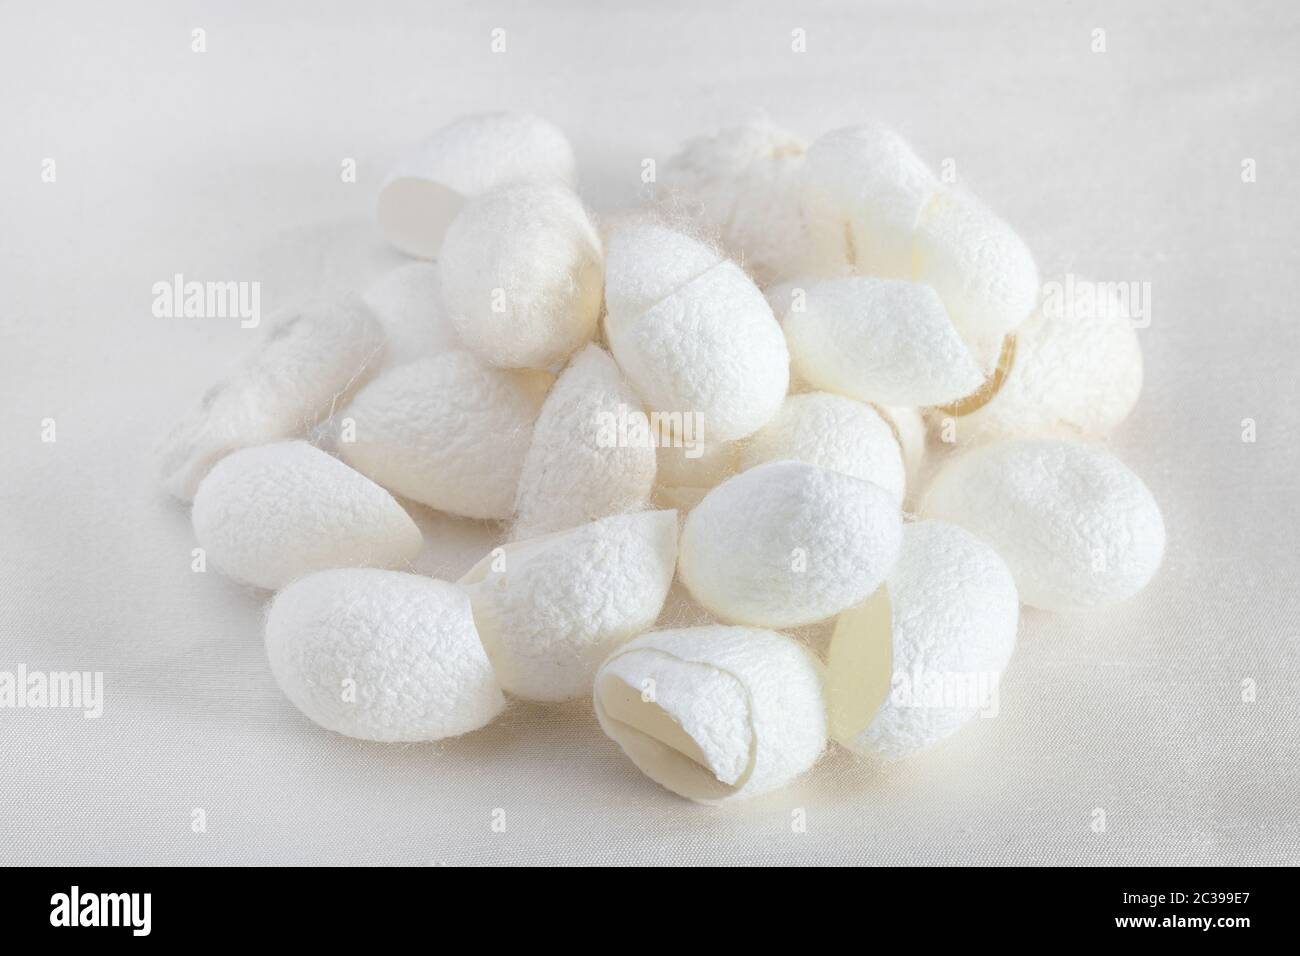 many organic silkworm cocoons for facial skin care on white silk fabric Stock Photo